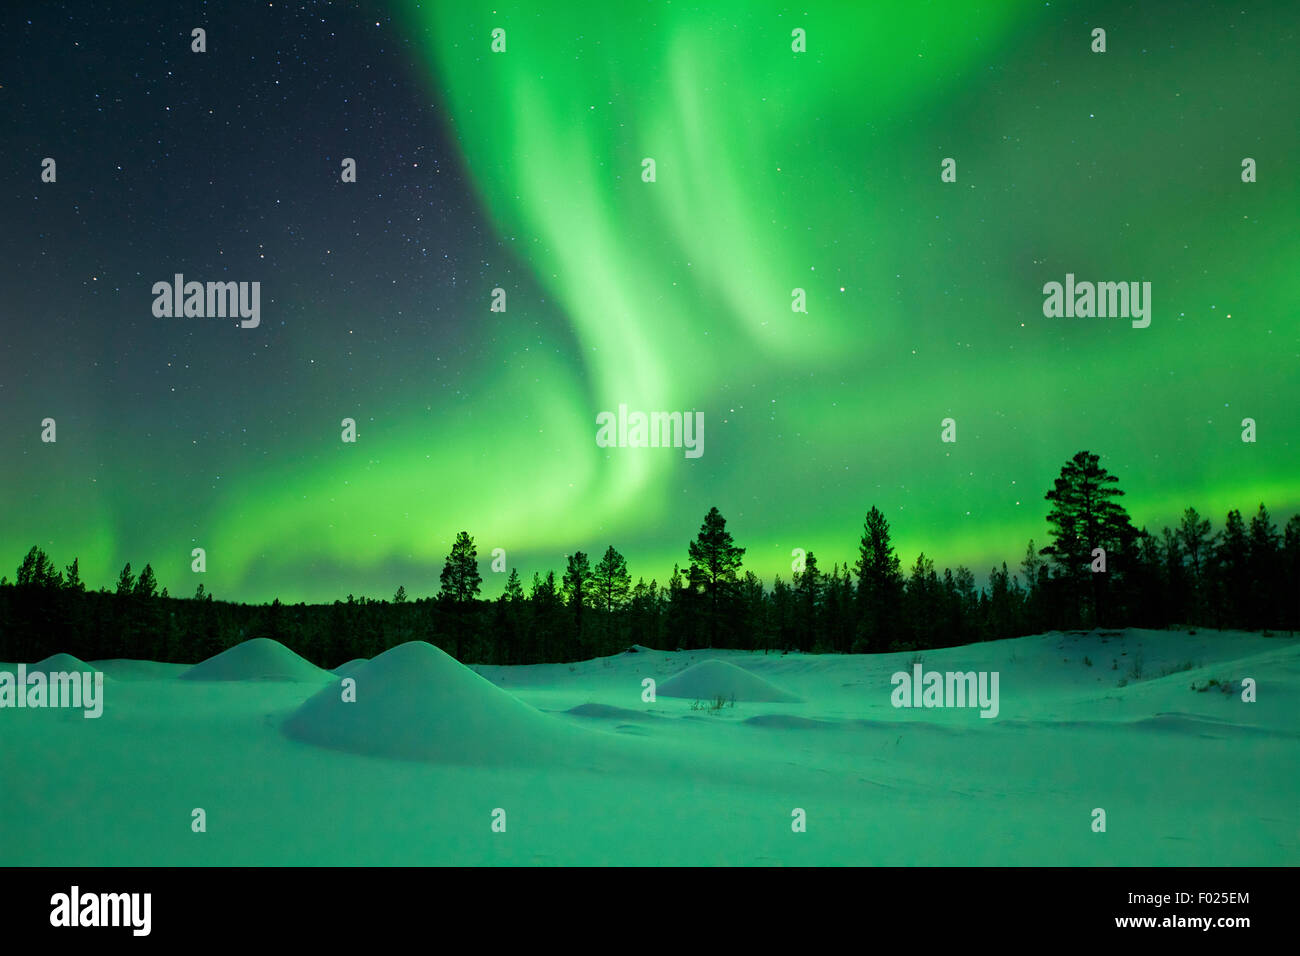 Spectacular aurora borealis (northern lights) over a snowy winter landscape in Finnish Lapland. Stock Photo